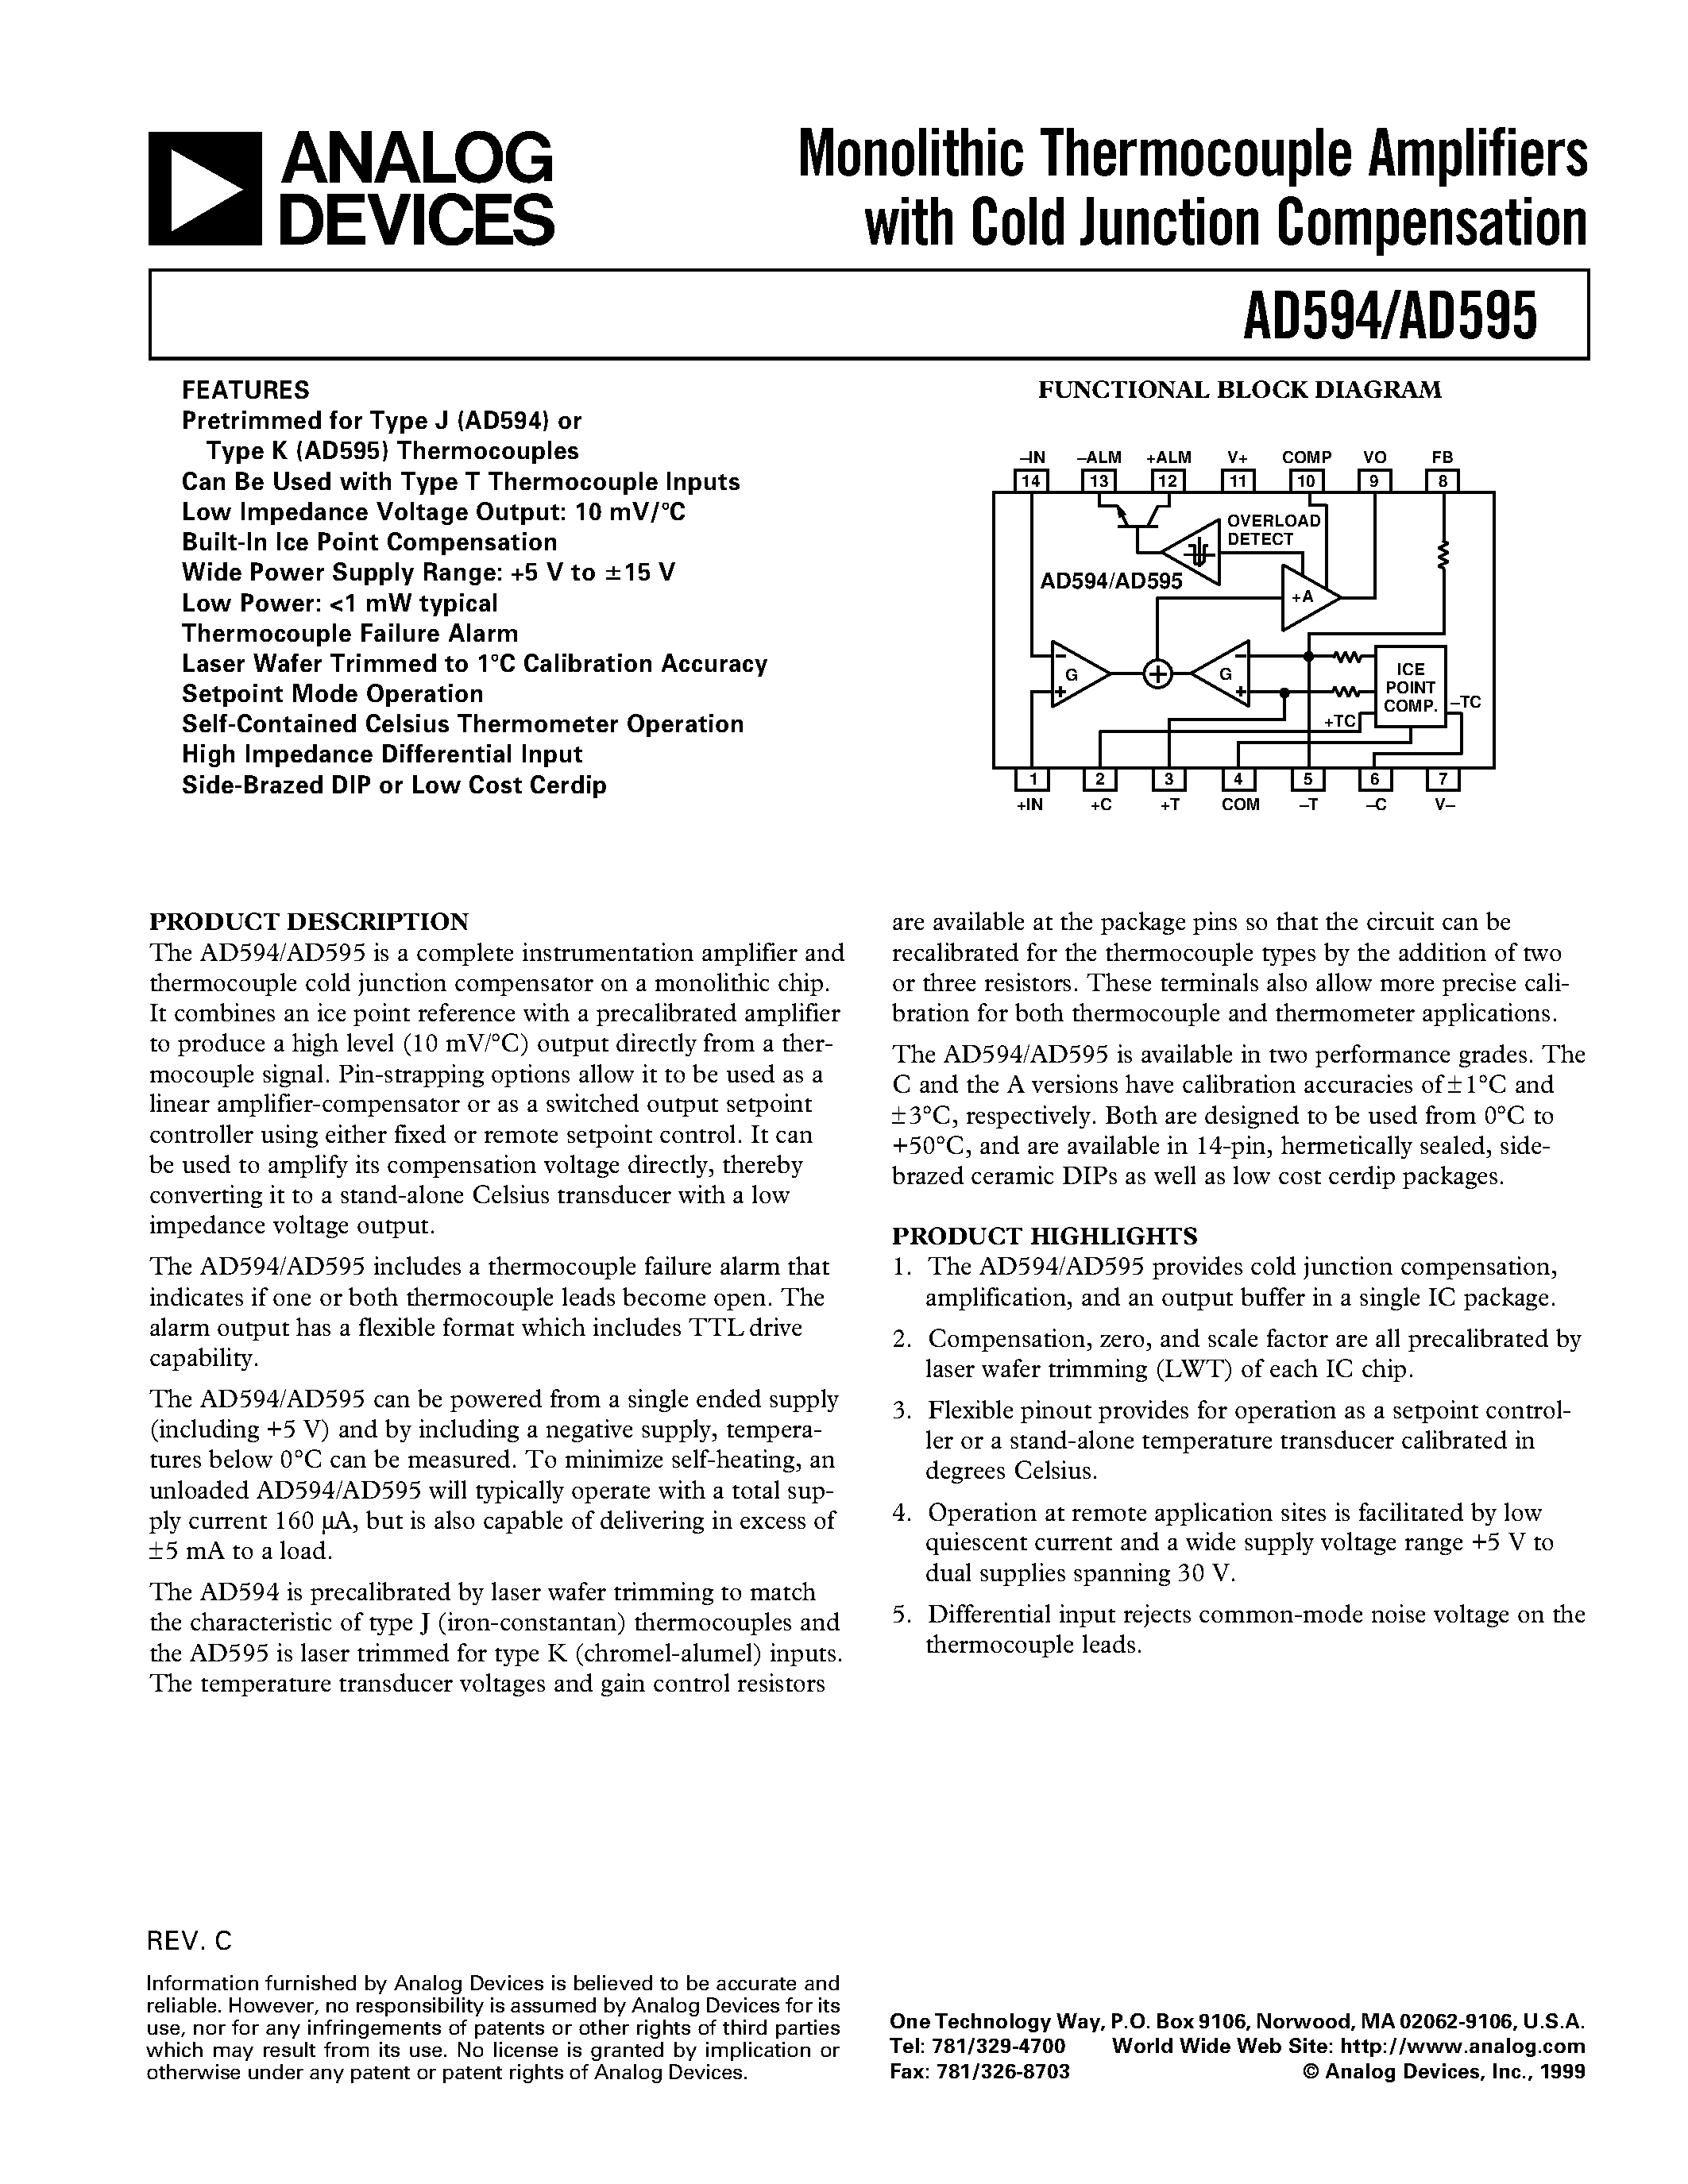 Datasheet AD594C - Monolithic Thermocouple Amplifiers with Cold Junction Compensation page 1